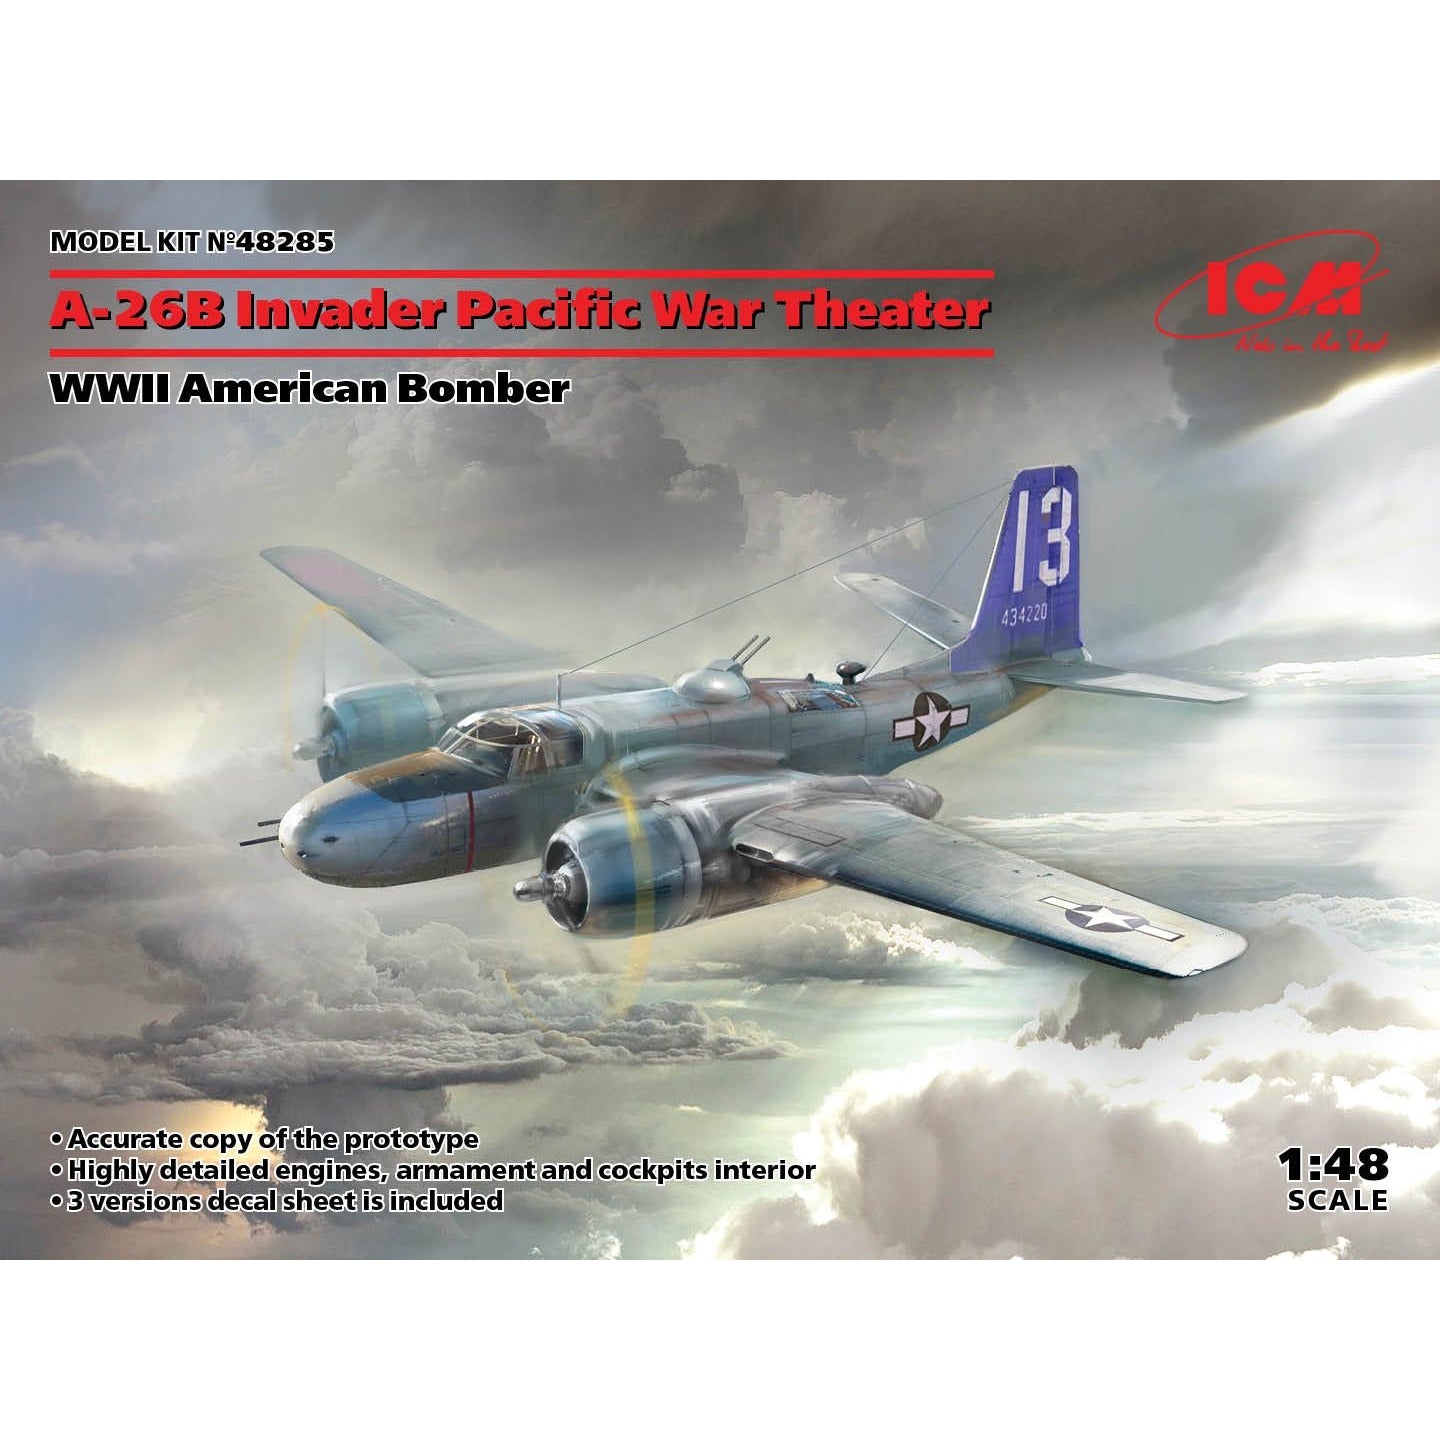 A-26B Invader Pacific War Theater, WWII American Bomber 1/48 by ICM